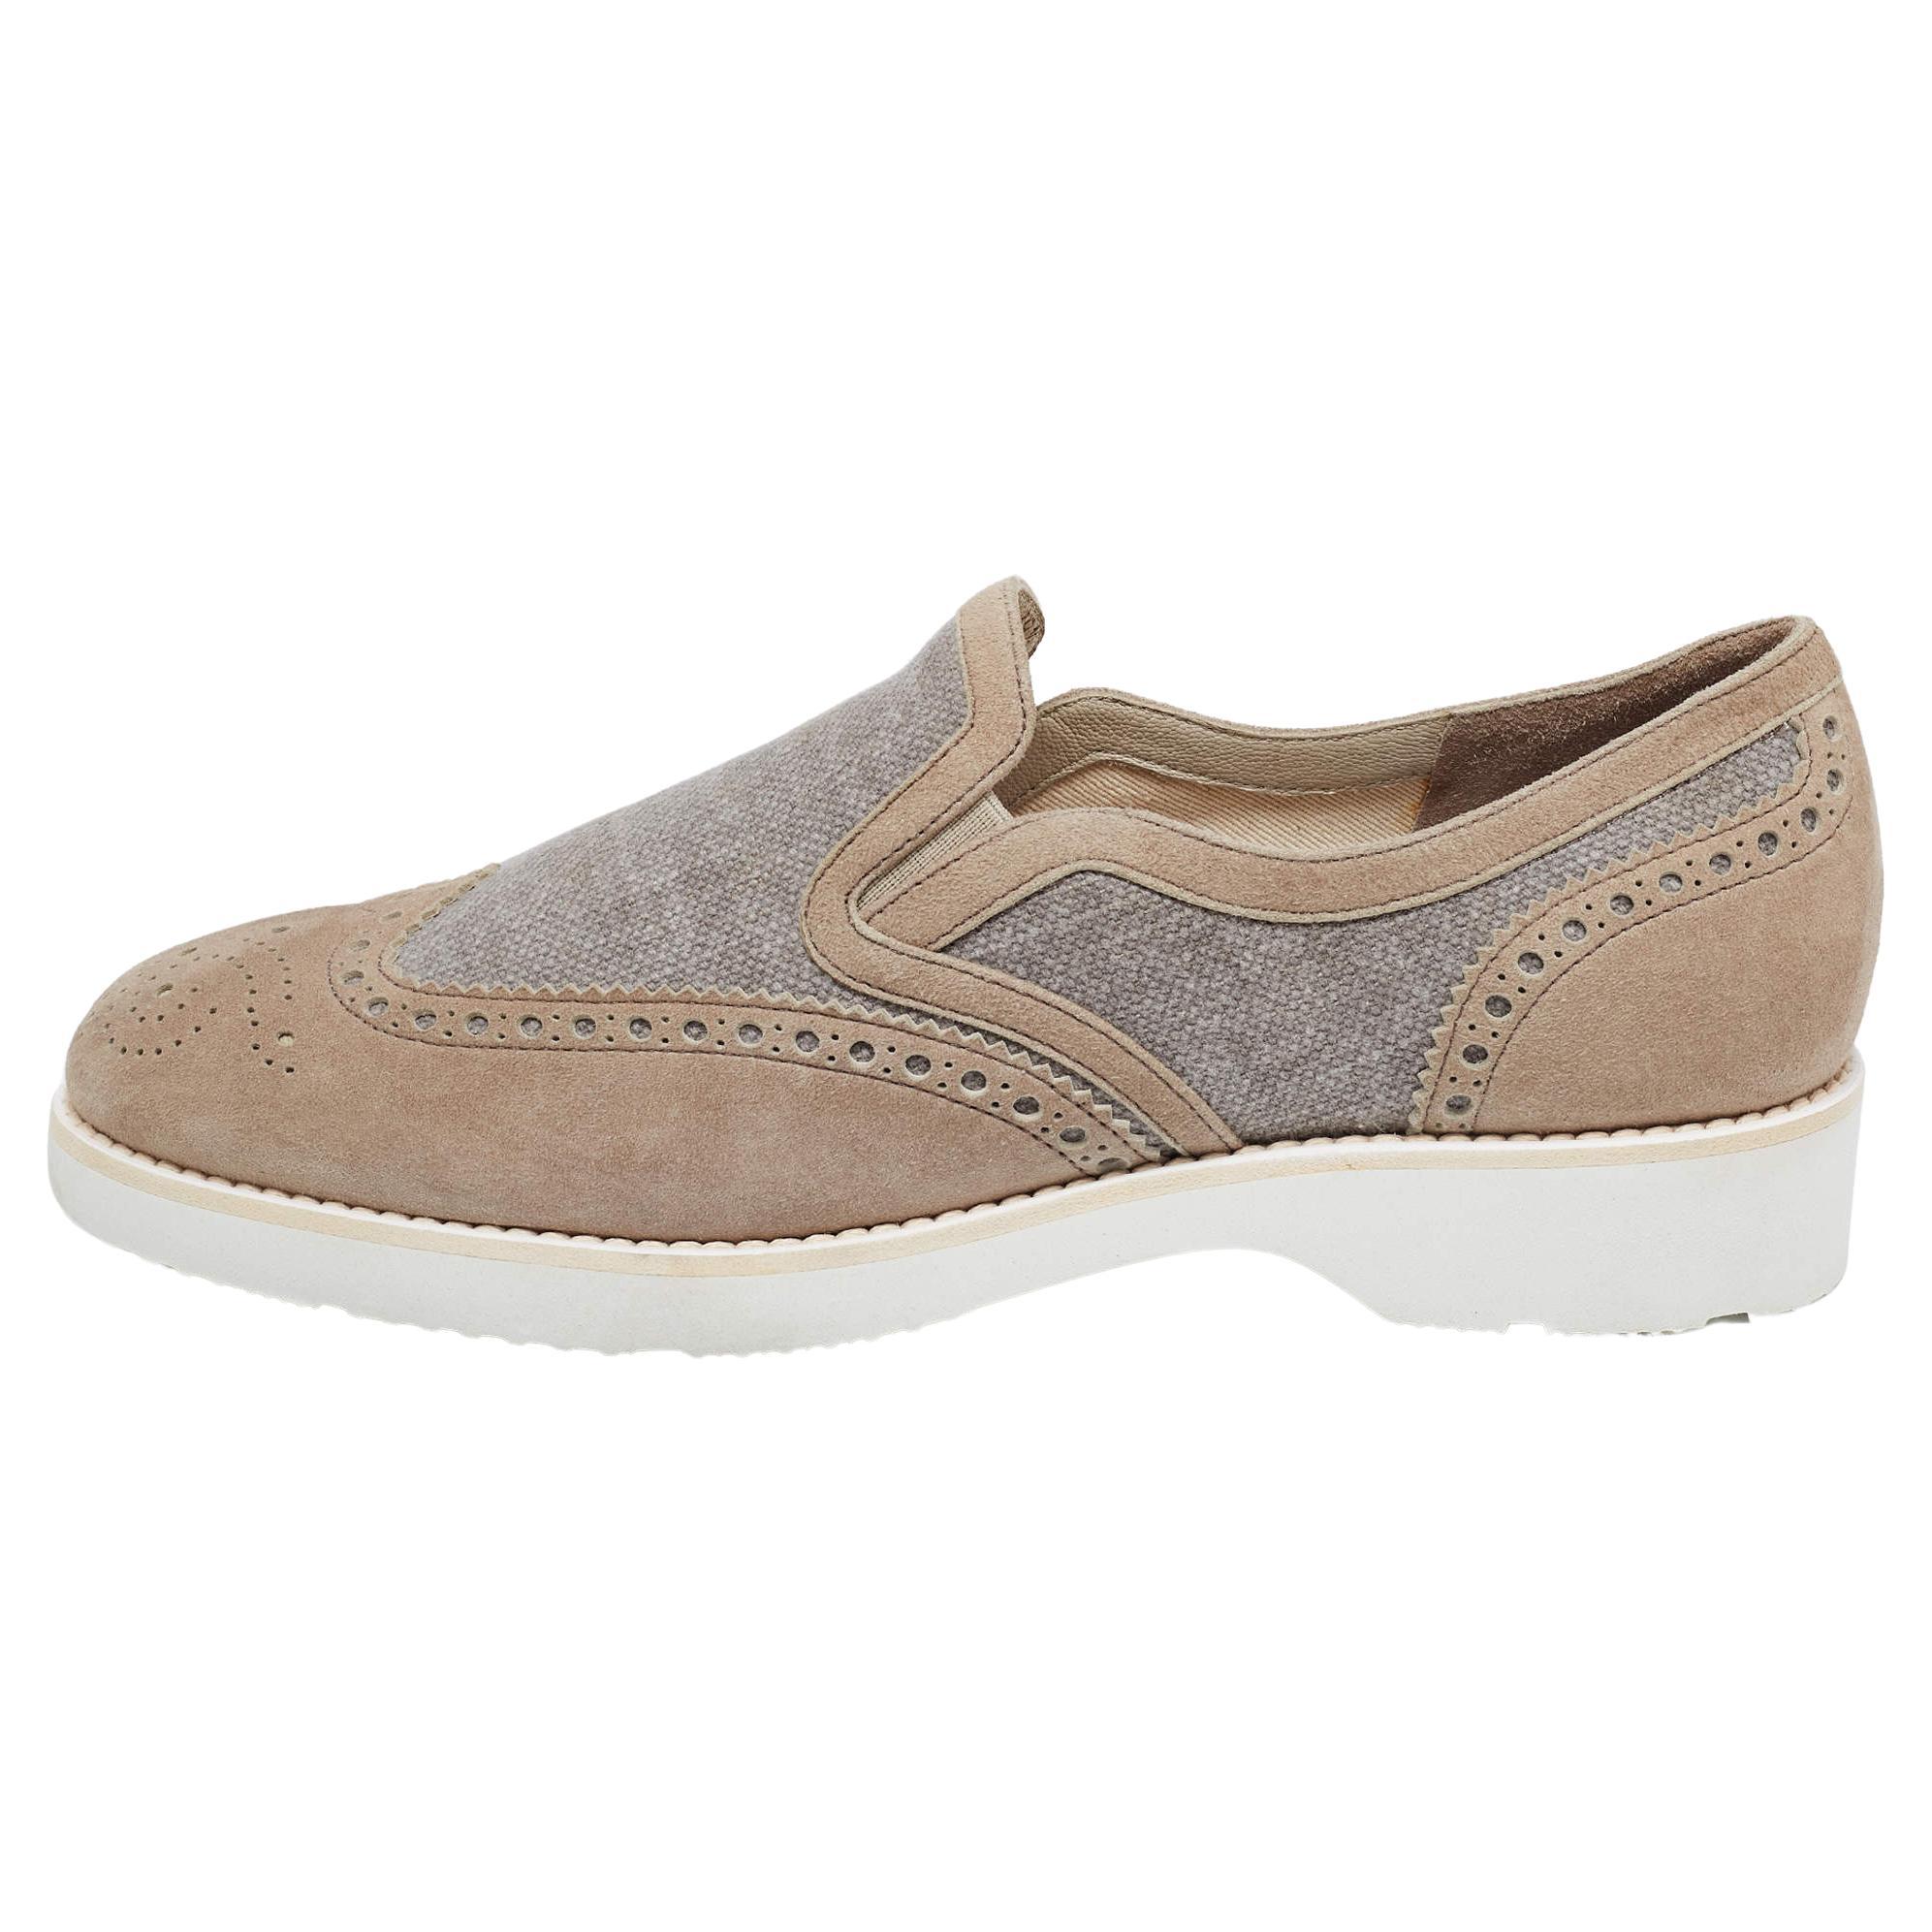 Santoni Grey Brogue Suede And Canvas Slip On Sneakers Size 39.5 For Sale